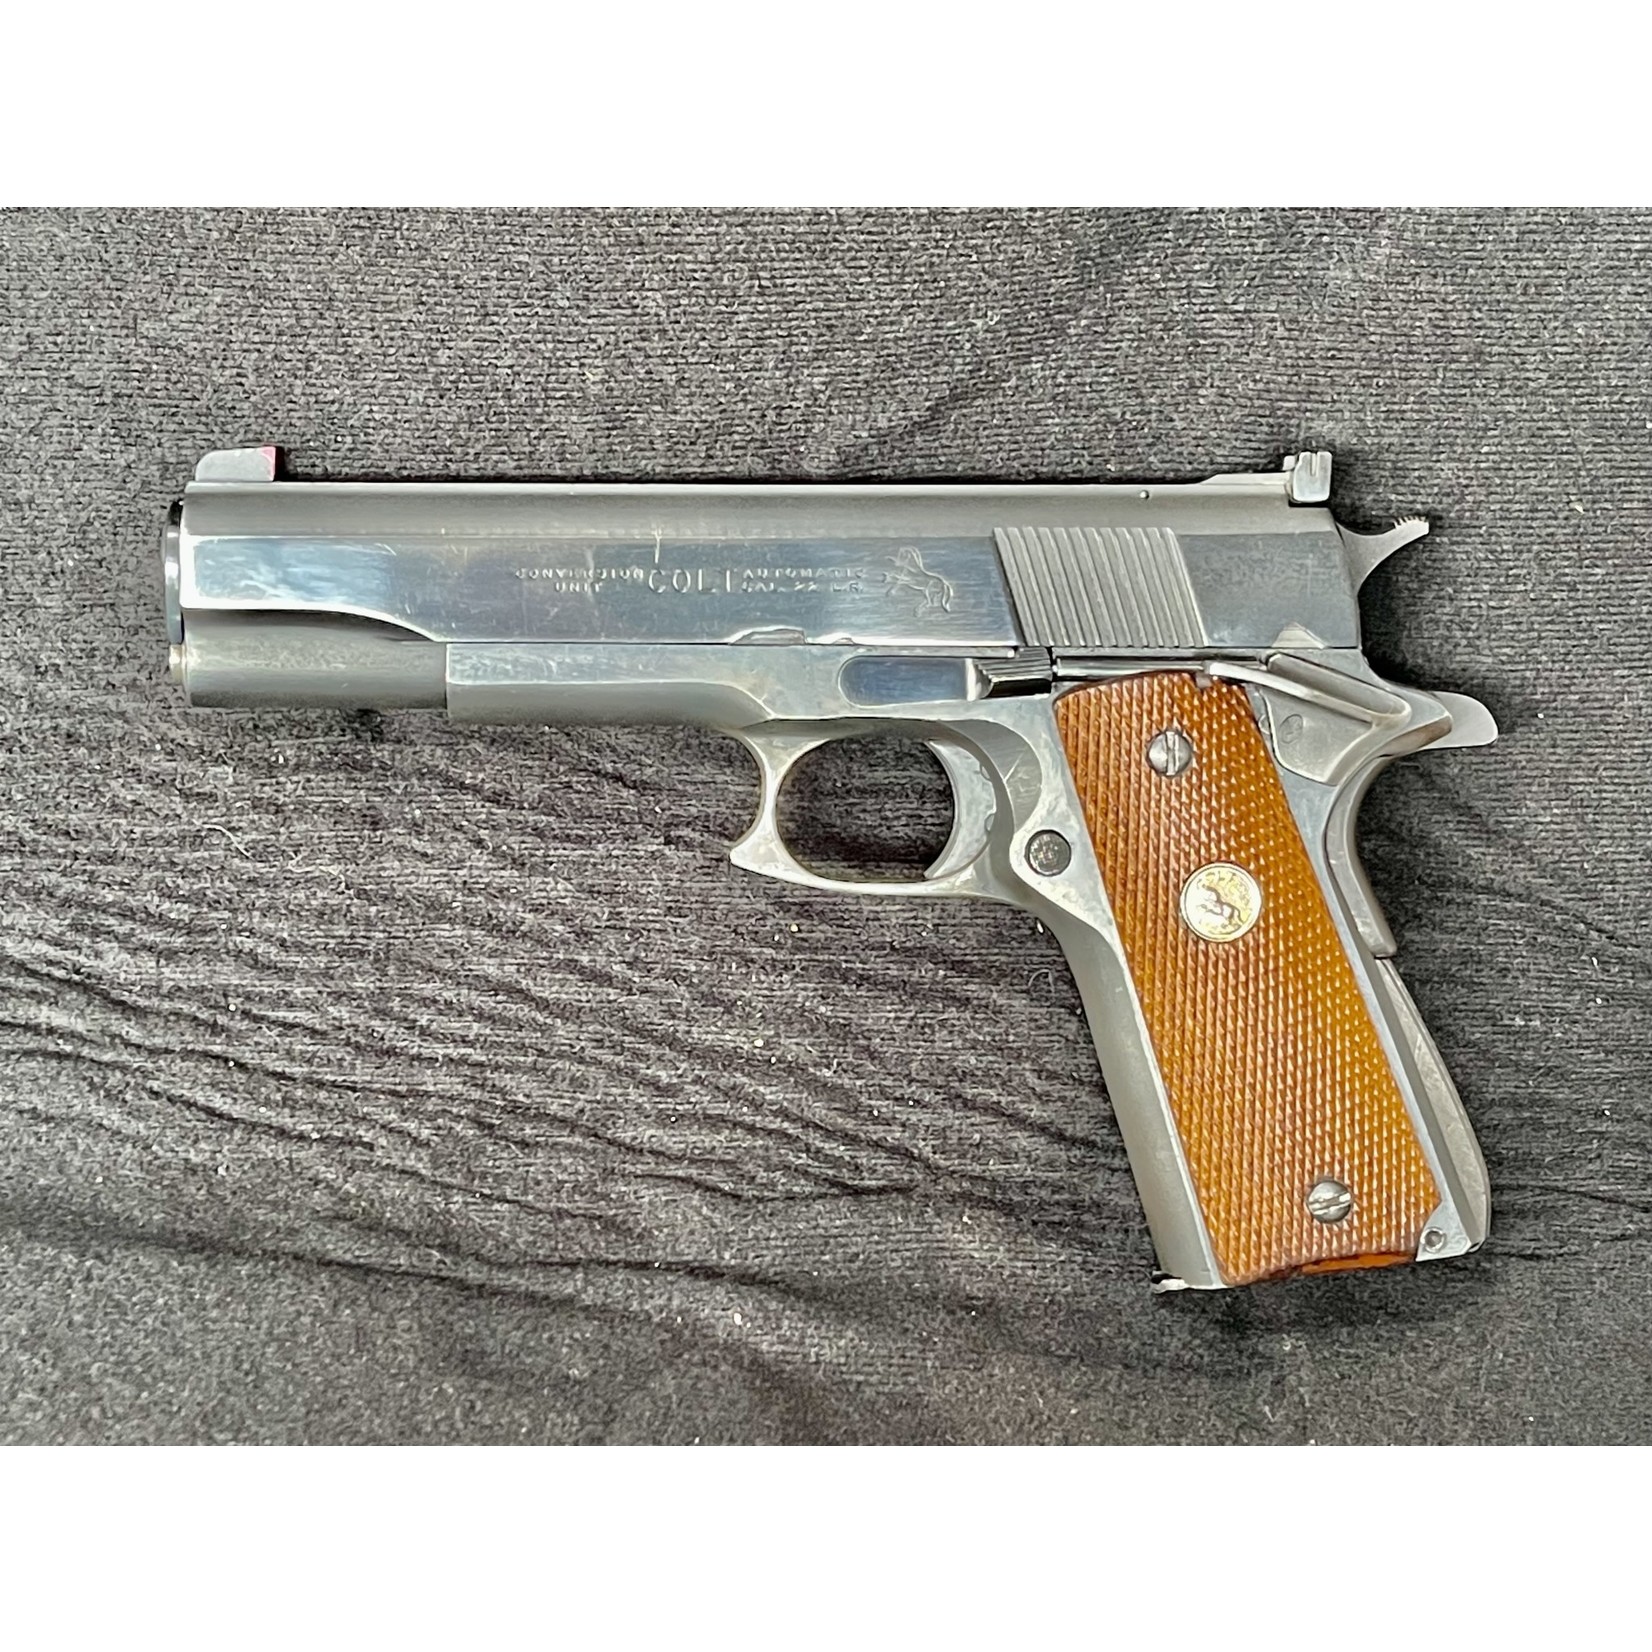 Walther/Colt/Hammerli Pre Owned Colt 1911 MkIV with ACE 22lr Conversion